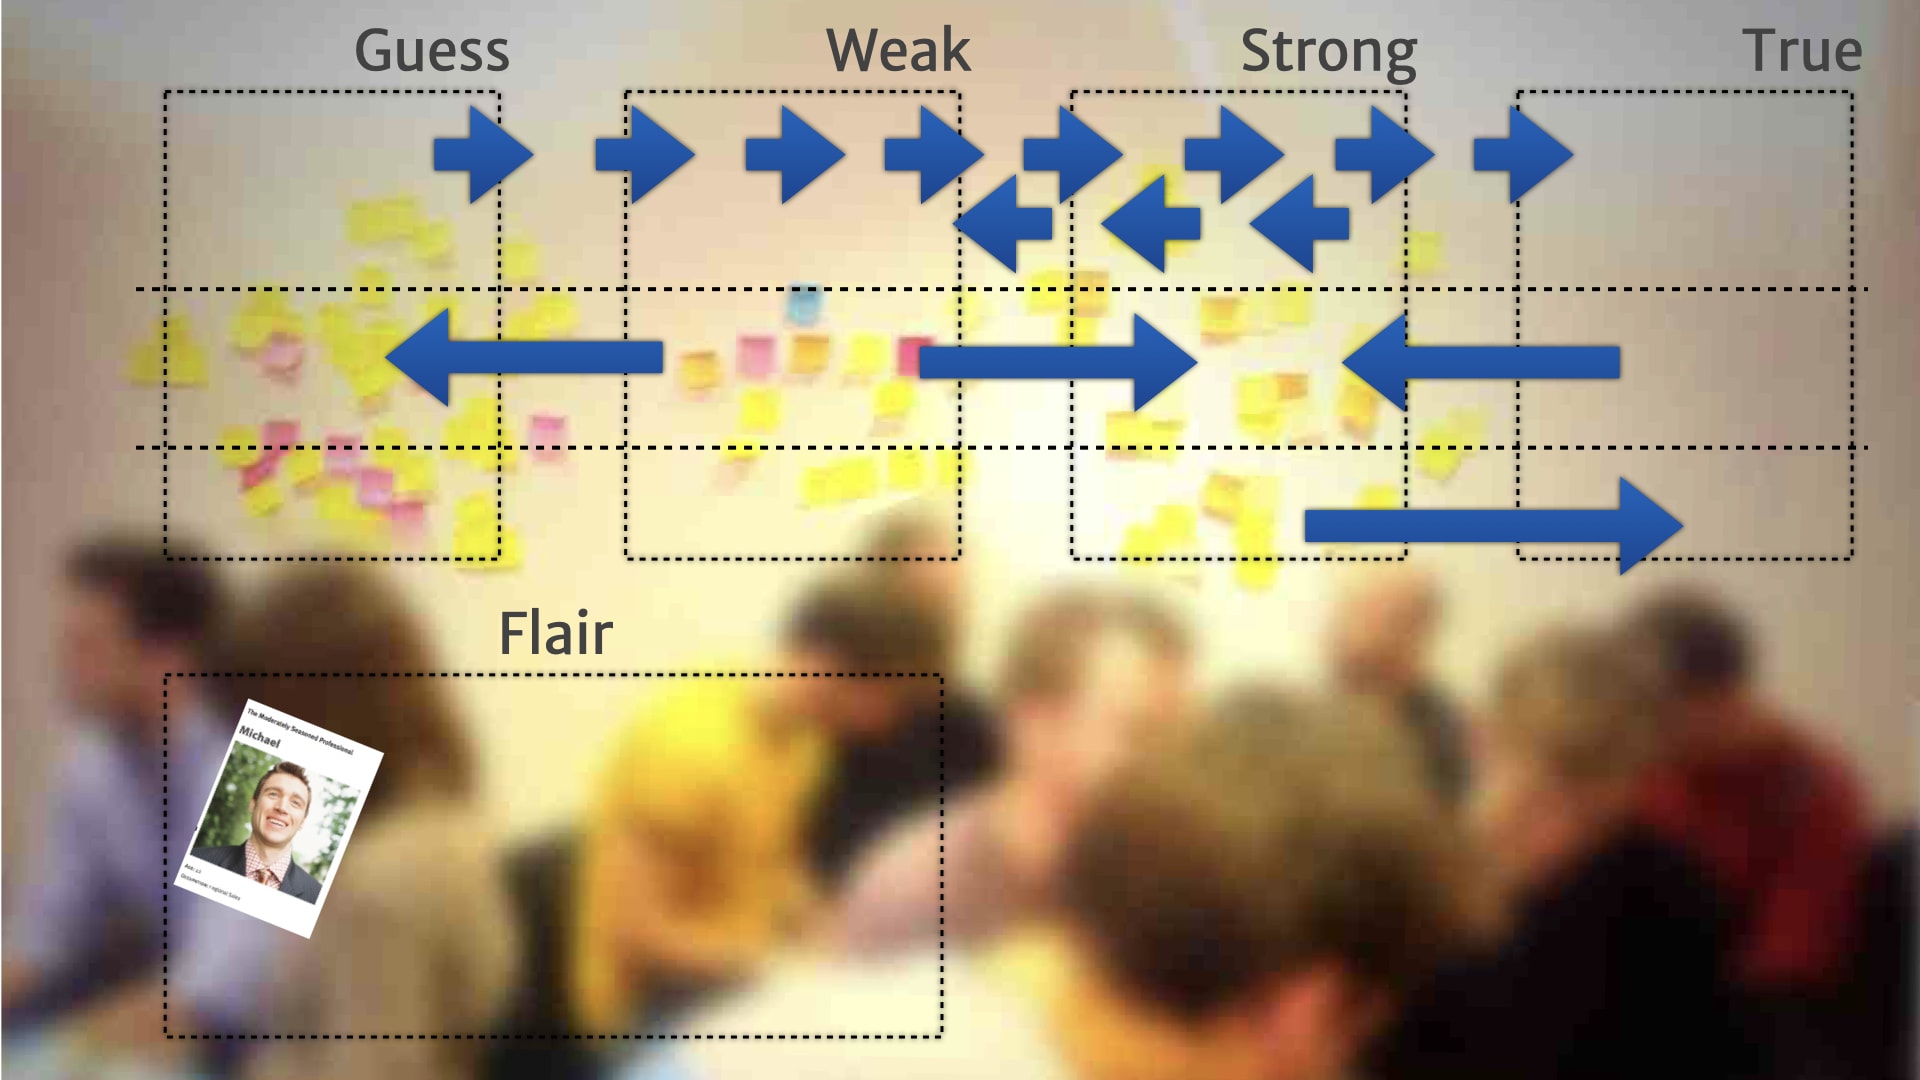 A picture of a wall of post-it notes divided into four categories running left to right (Guess, Weak, Strong, and True). At the top many short blue arrows illustrate rapid transitions between the sections at the top. In the middle a few medium length blue arrows indicate illustrate occasional transitions. At the bottom a single long blue arrow illustrates a rare transition.